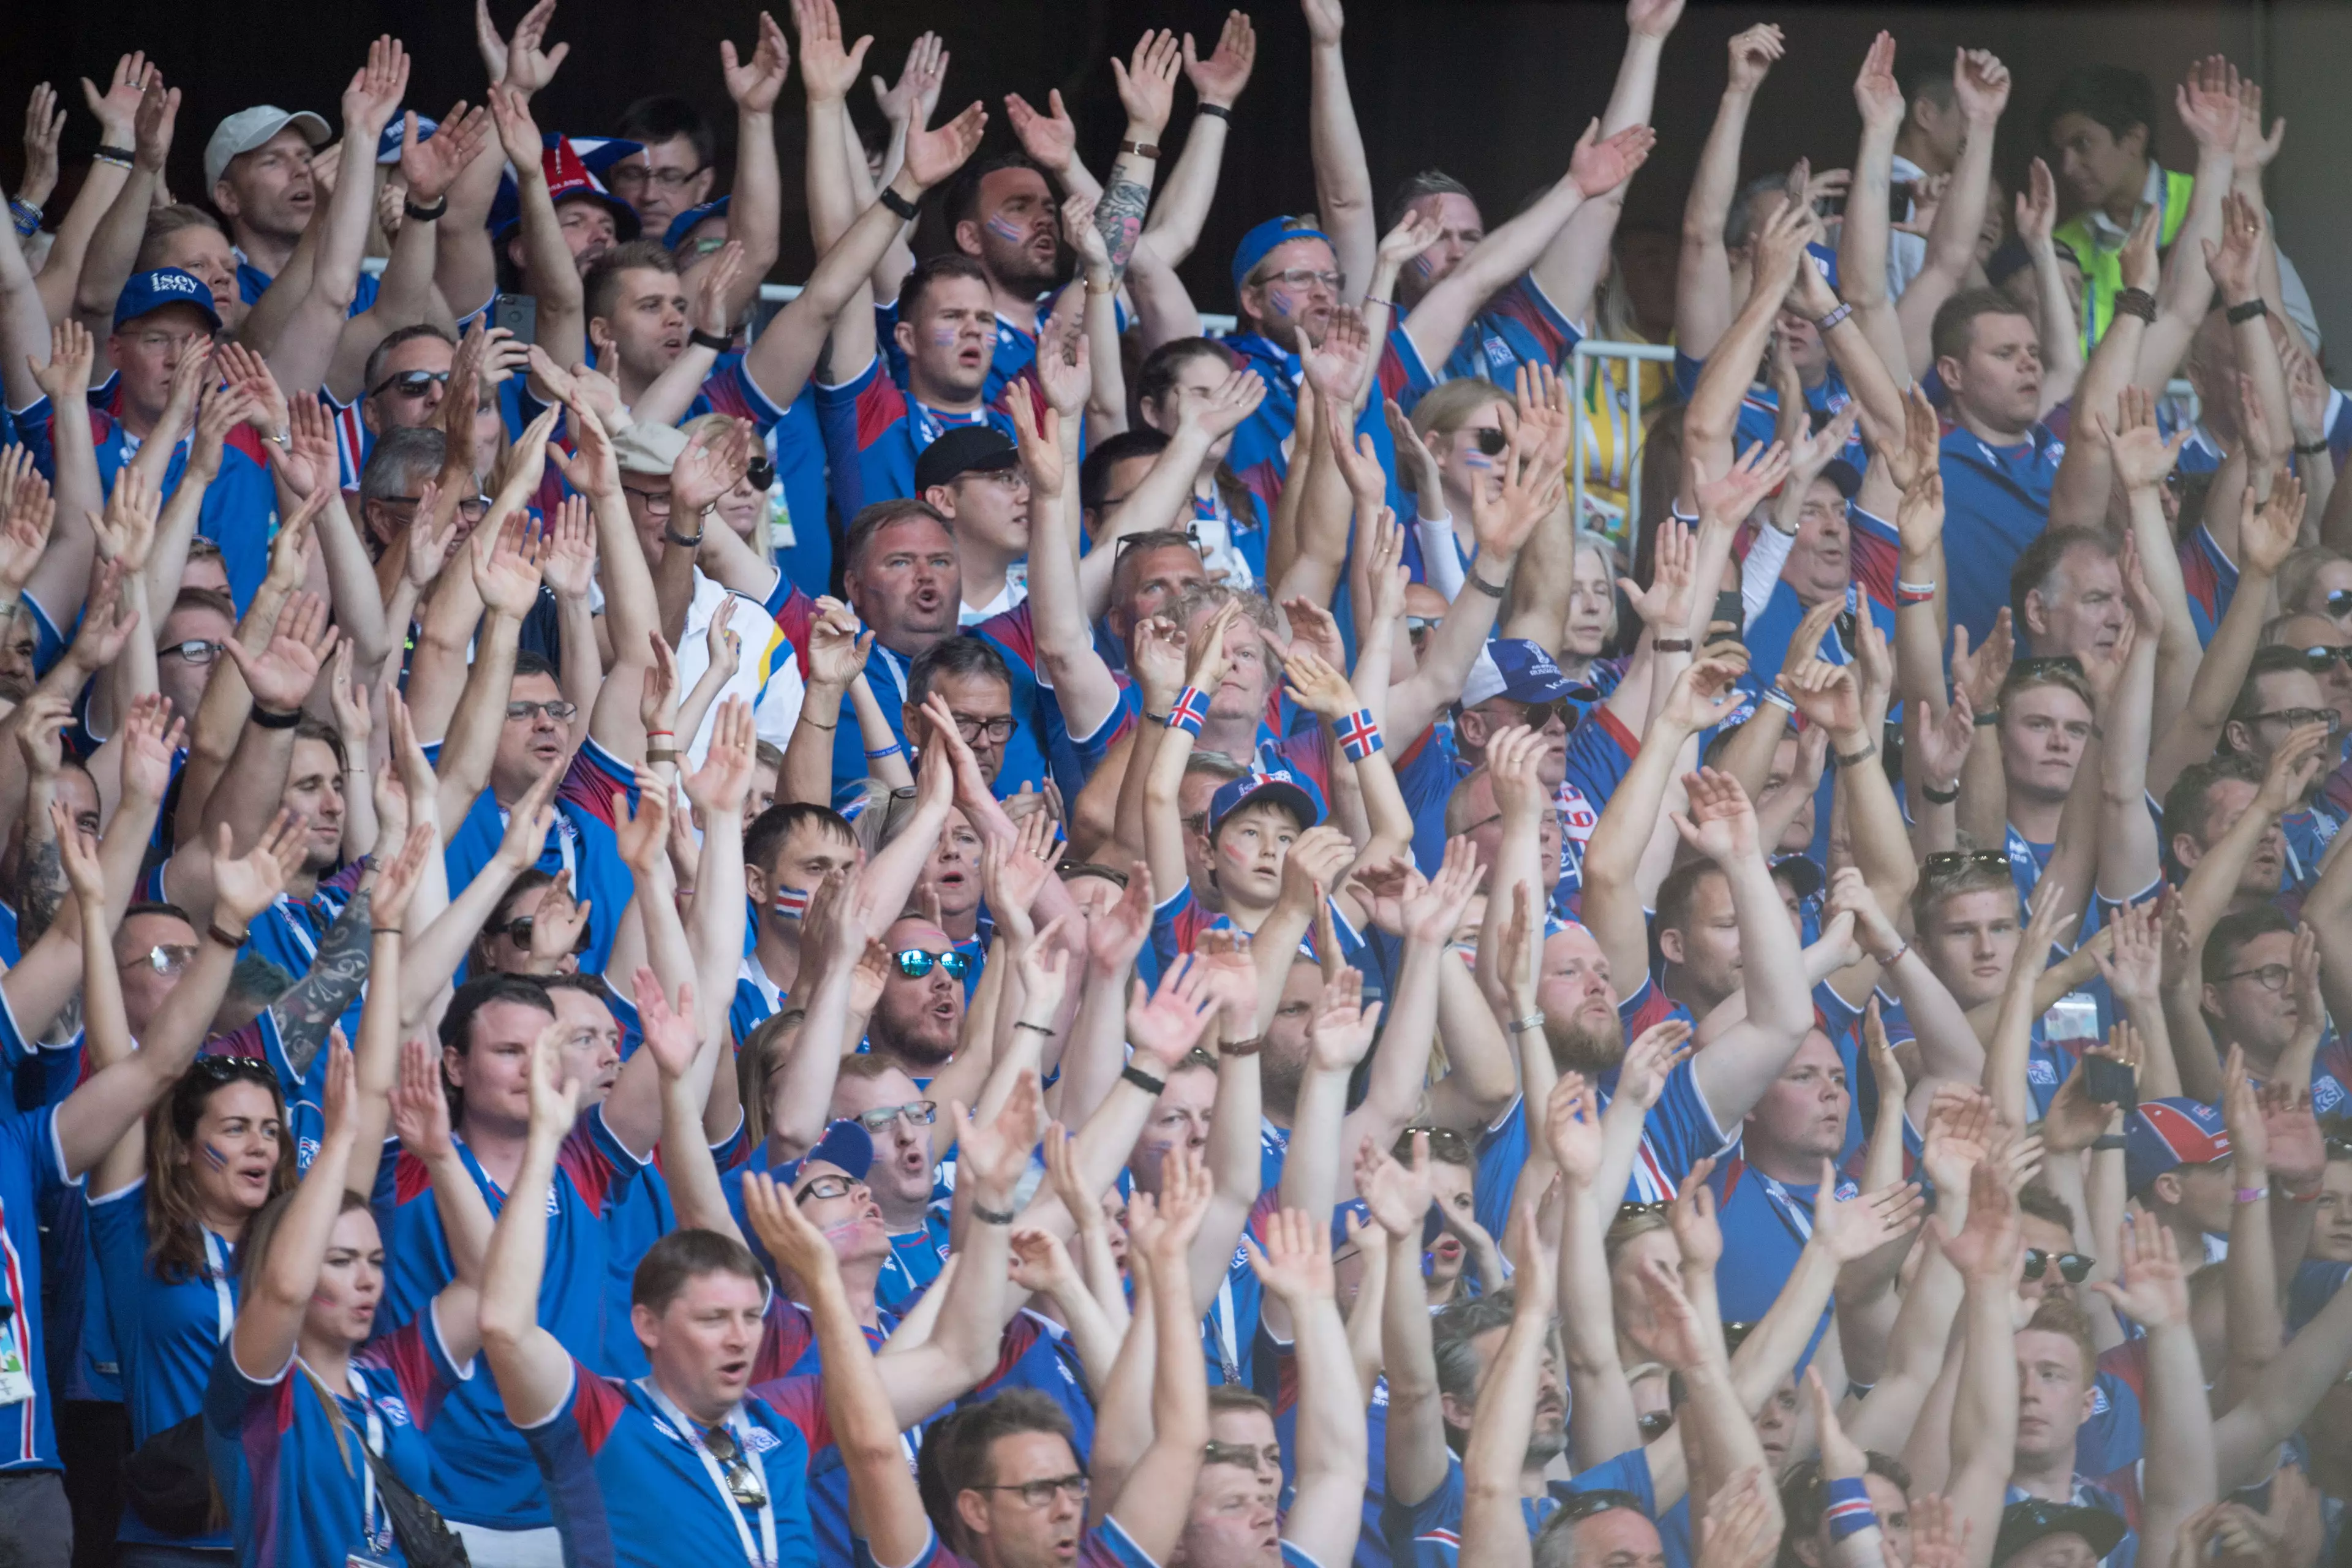 An Amazing 99.6% Of Iceland's Population Watched Their World Cup Debut On Saturday